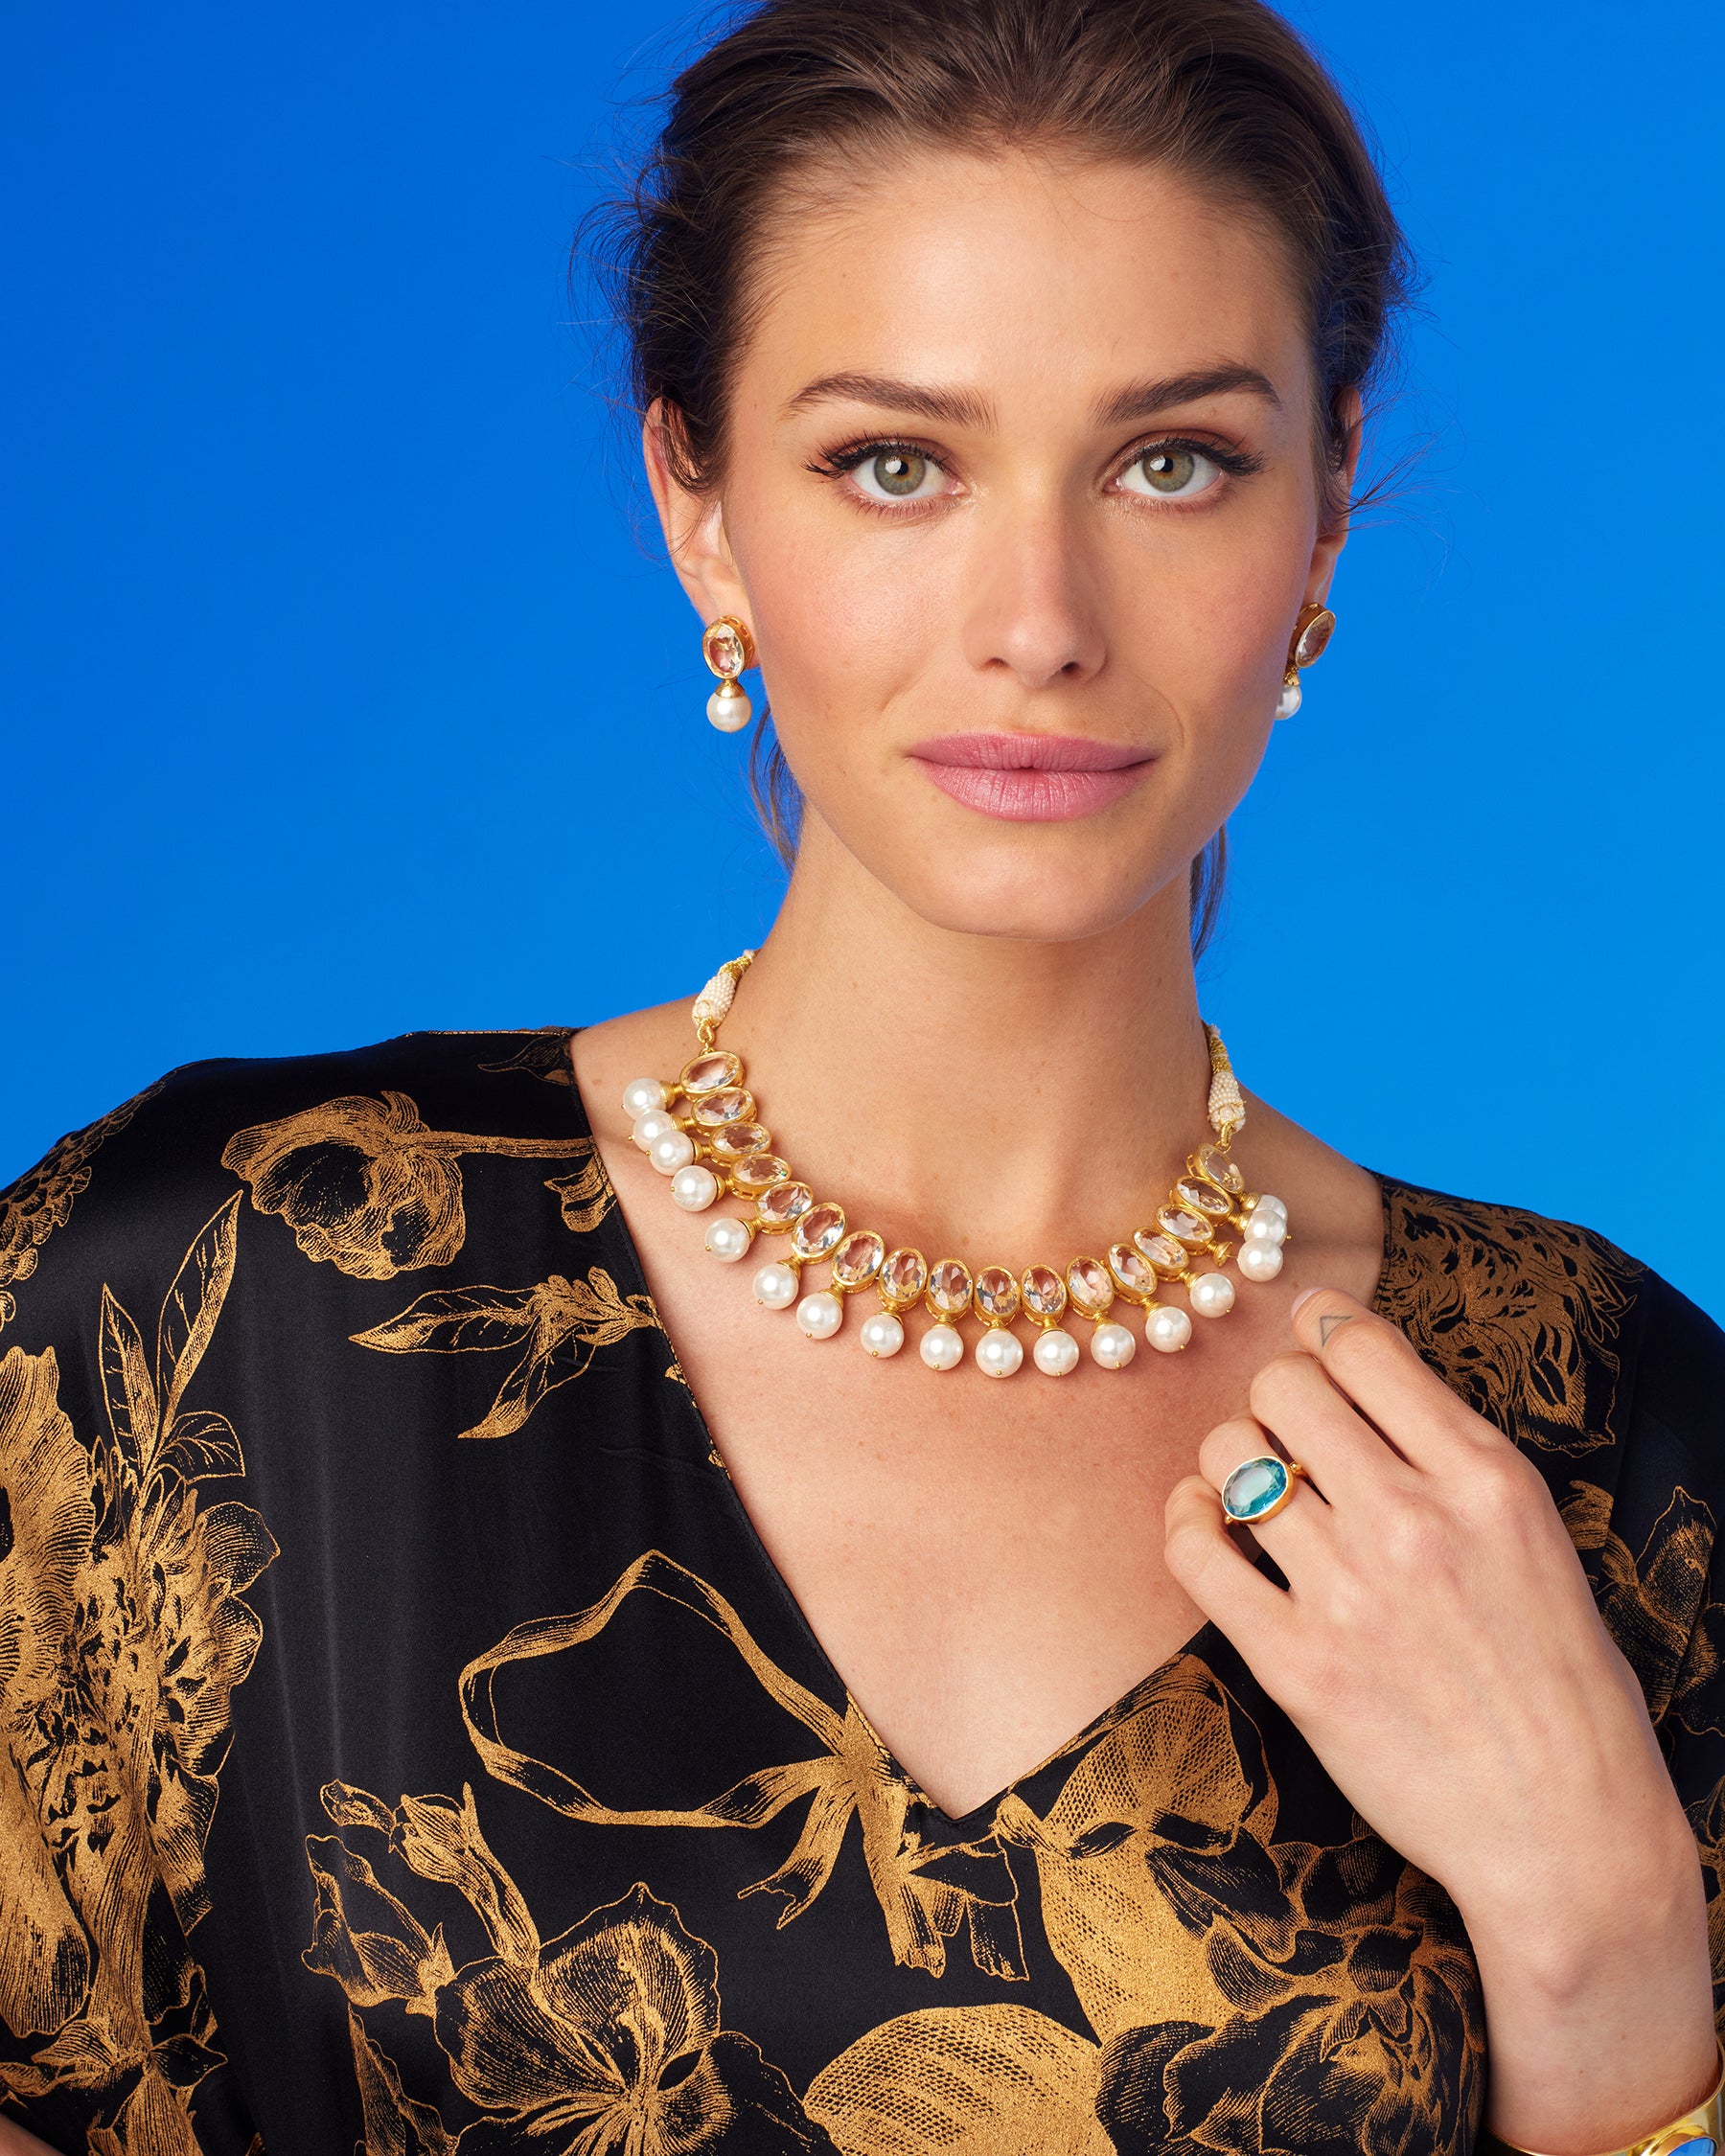 Shireen Black Silk Kaftan in Gold Floral Toile-Wearing the Gia Clear Crystal Earrings and Necklace